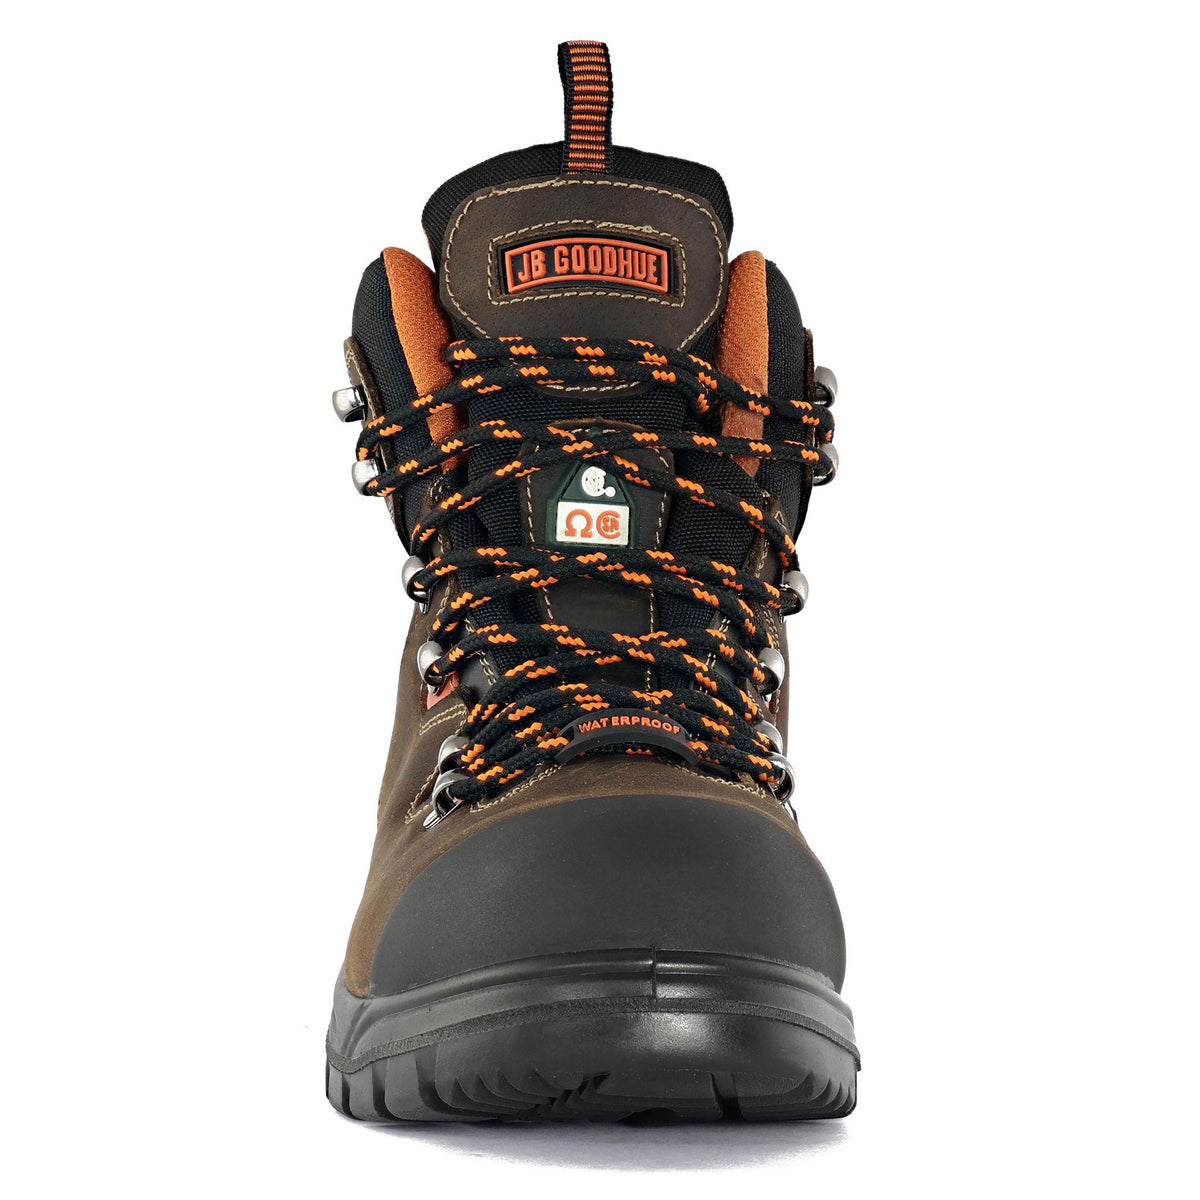 Jb Goodhue Adrenaline3 30906 Brown Shoes